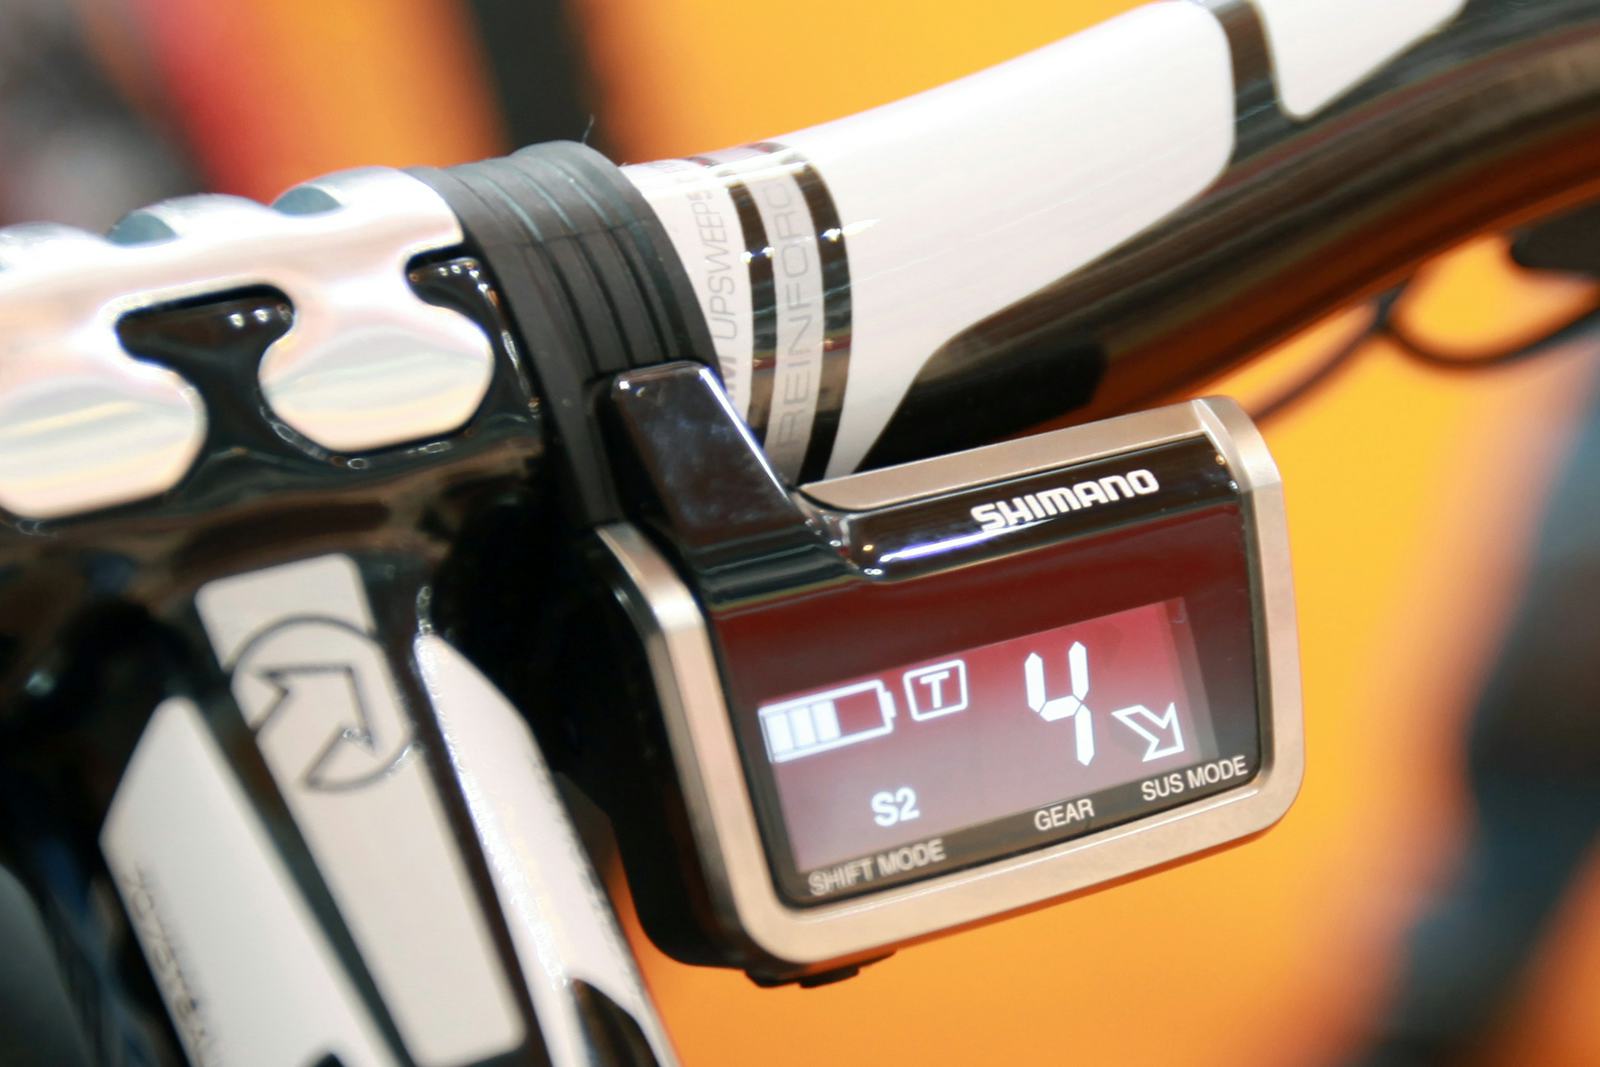 The XTR Di2’s display now also shows the CTD position of the suspension (Climb – Trail – Descend). – Photo Grega Stopar